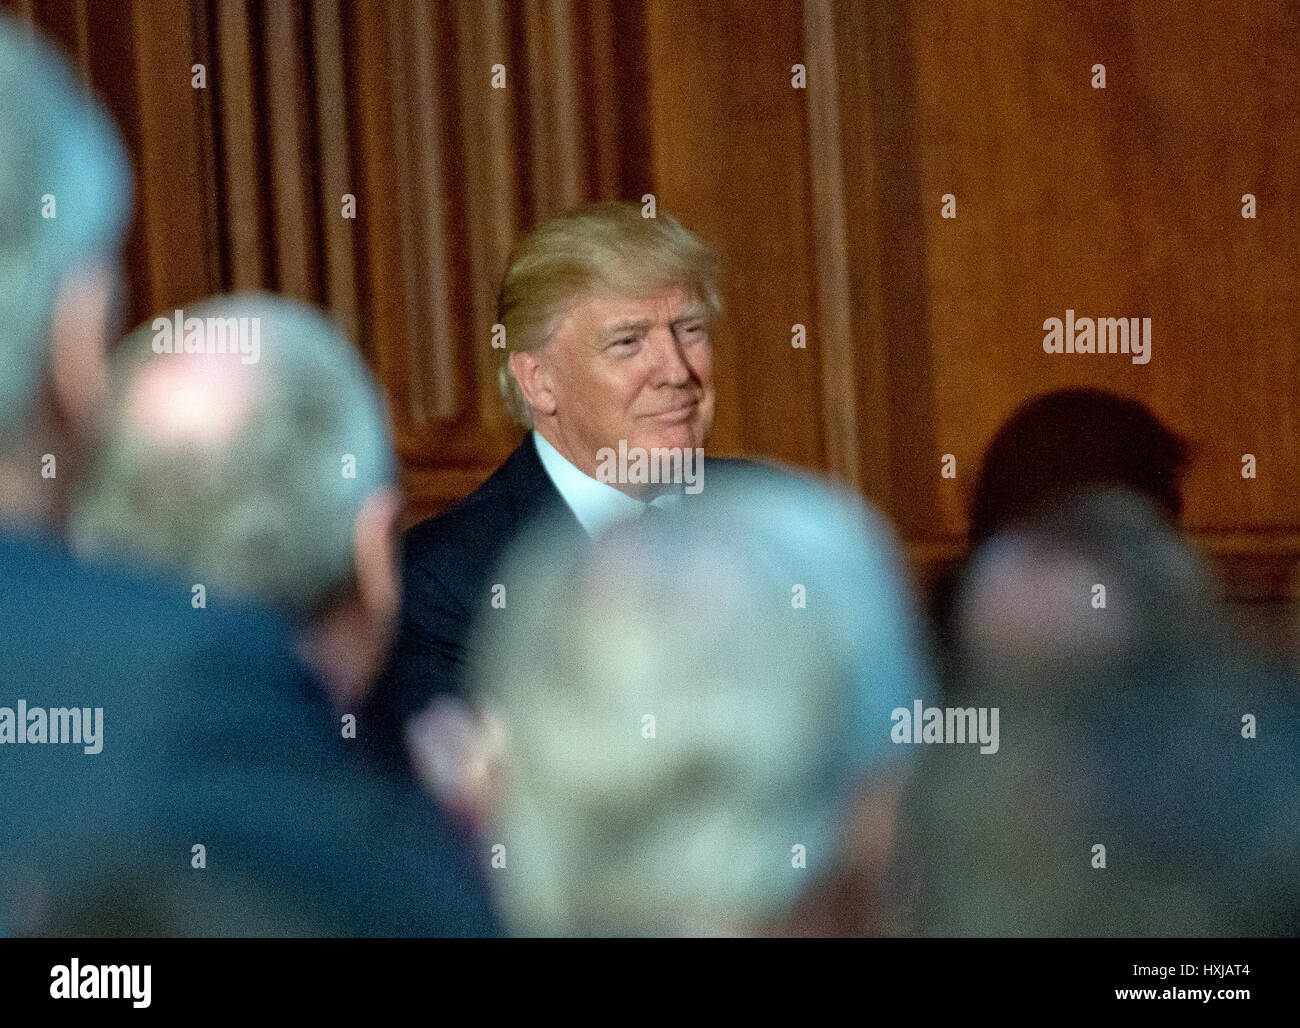 Washington, USA. 28th Mar, 2017. United States President Donald J. Trump arrives to sign an Energy Independence Executive Order at the Environmental Protection Agency (EPA) Headquarters in Washington, DC on Thursday, March 28, 2017. The order reverses the Obama-era climate change policies. Credit: MediaPunch Inc/Alamy Live News Stock Photo